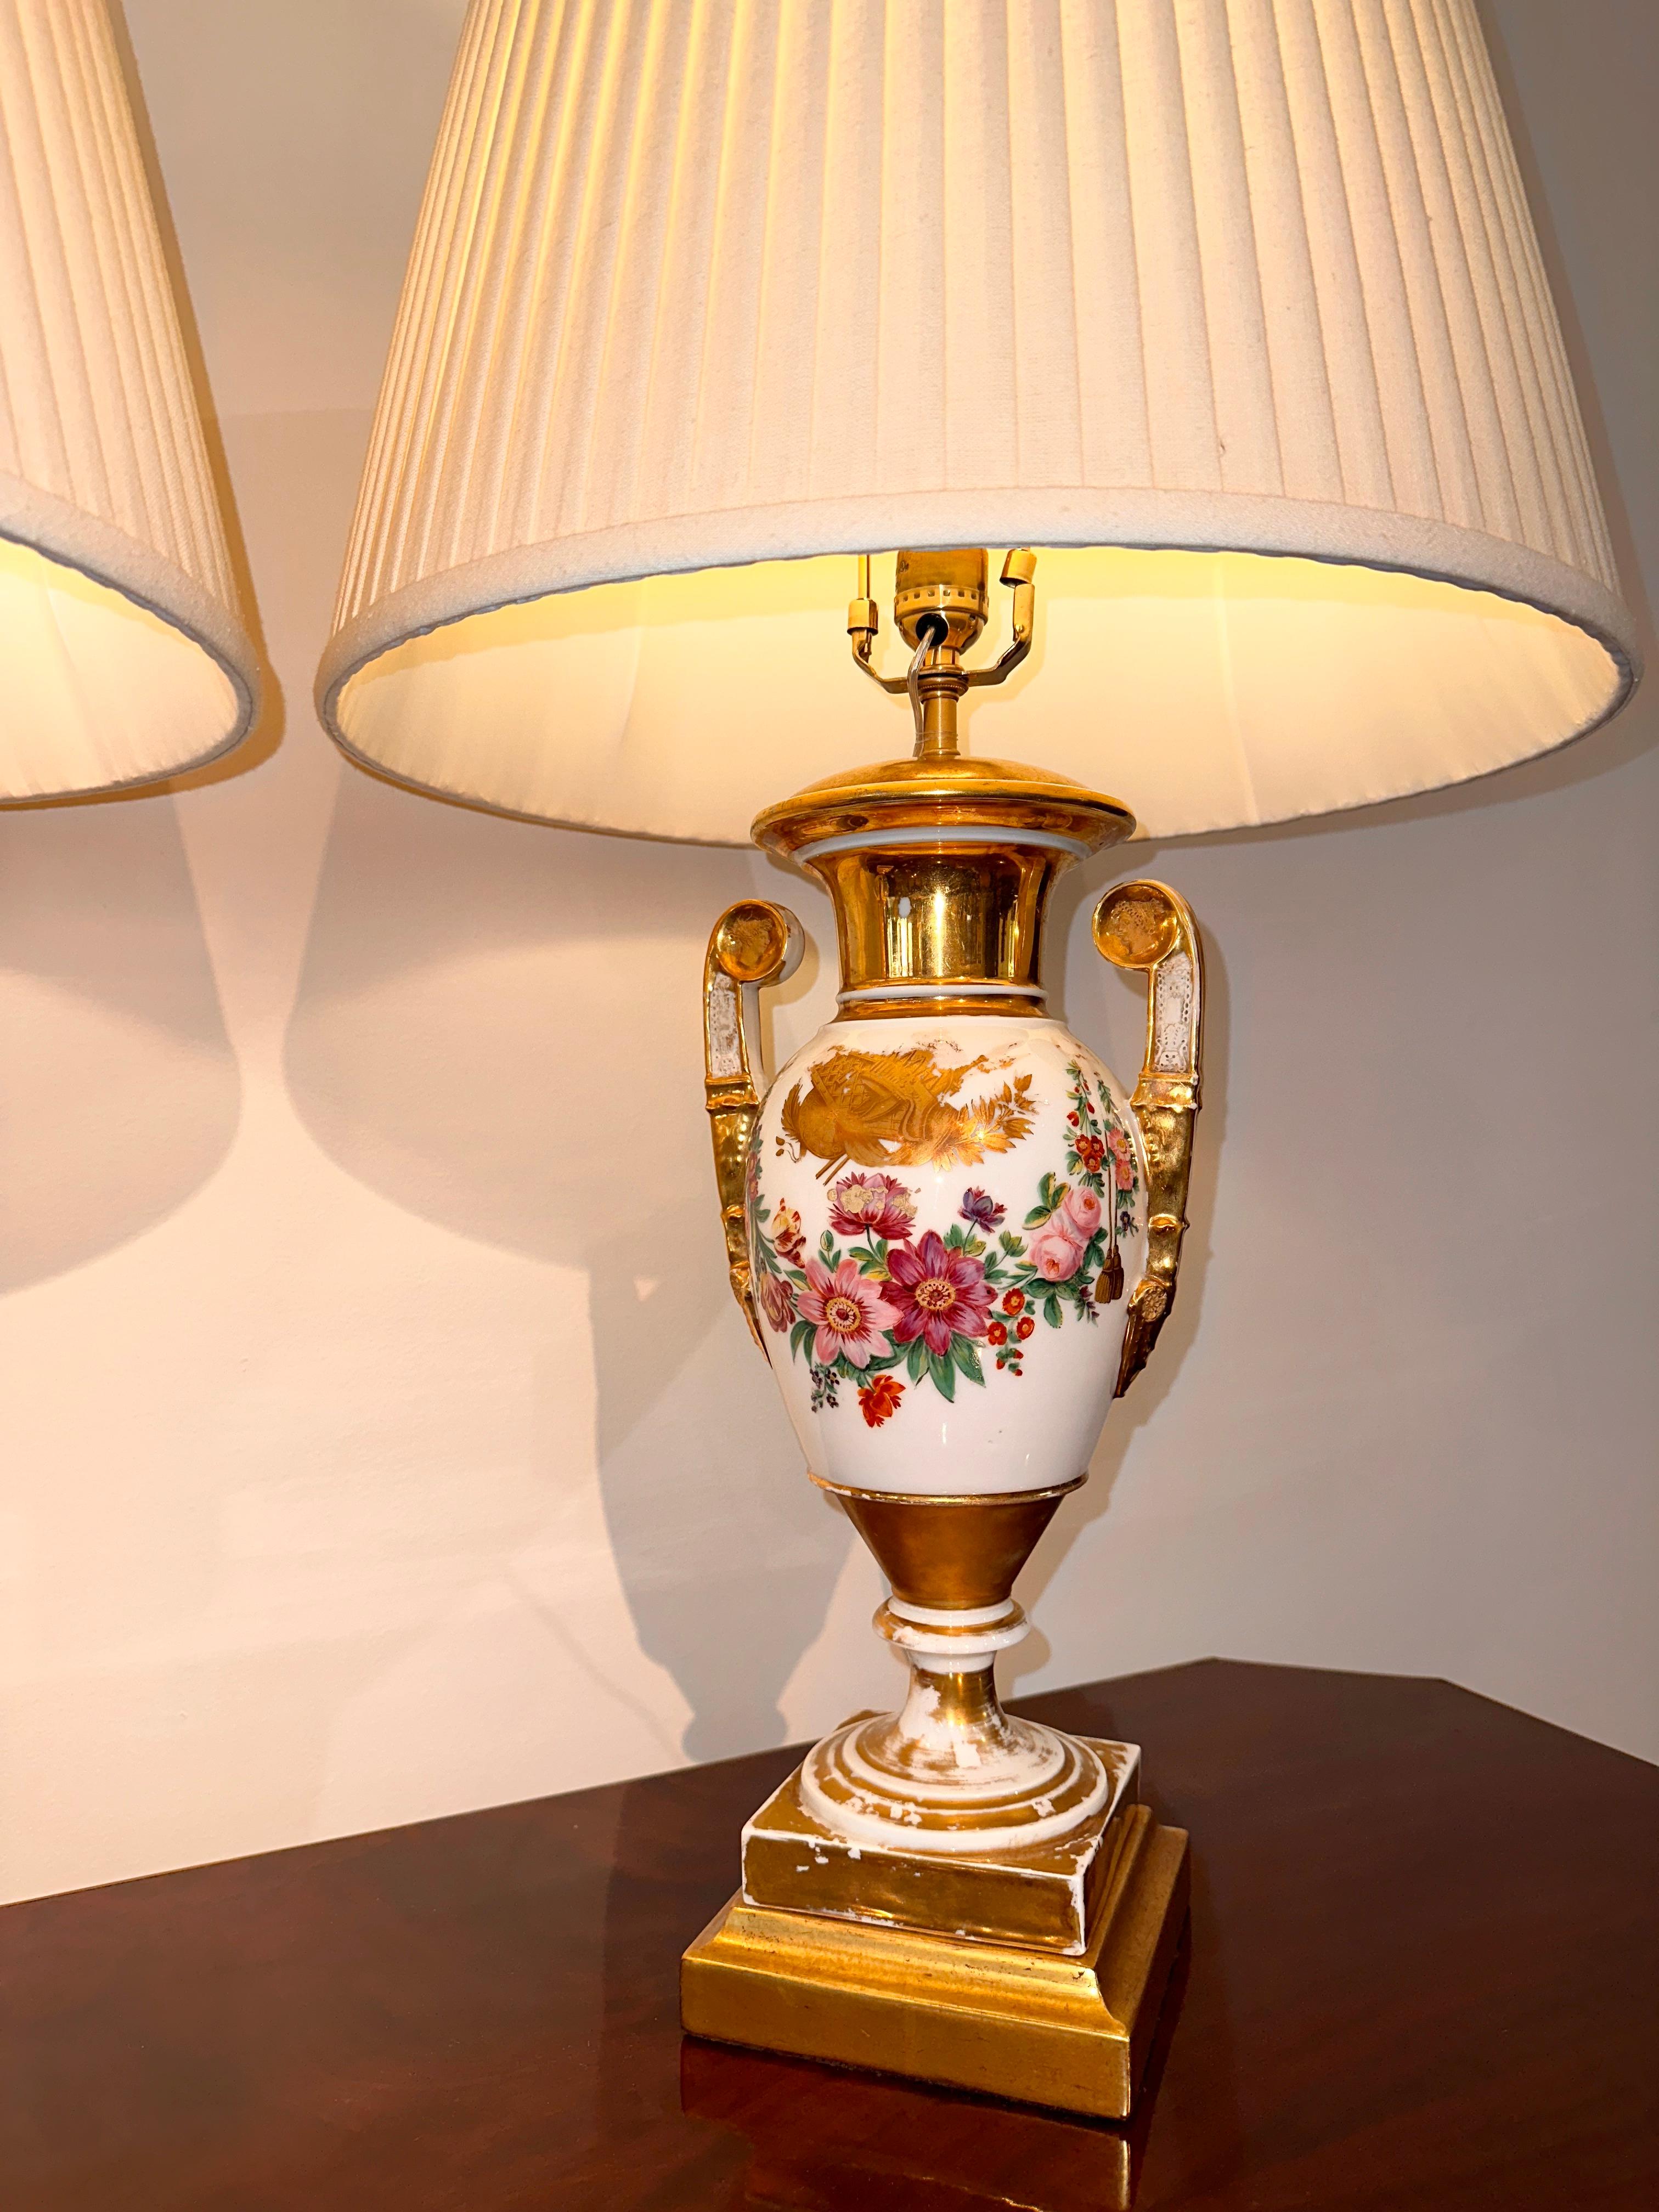 Paris Porcelain urns, wired as lamps In Good Condition For Sale In Santa Barbara, CA